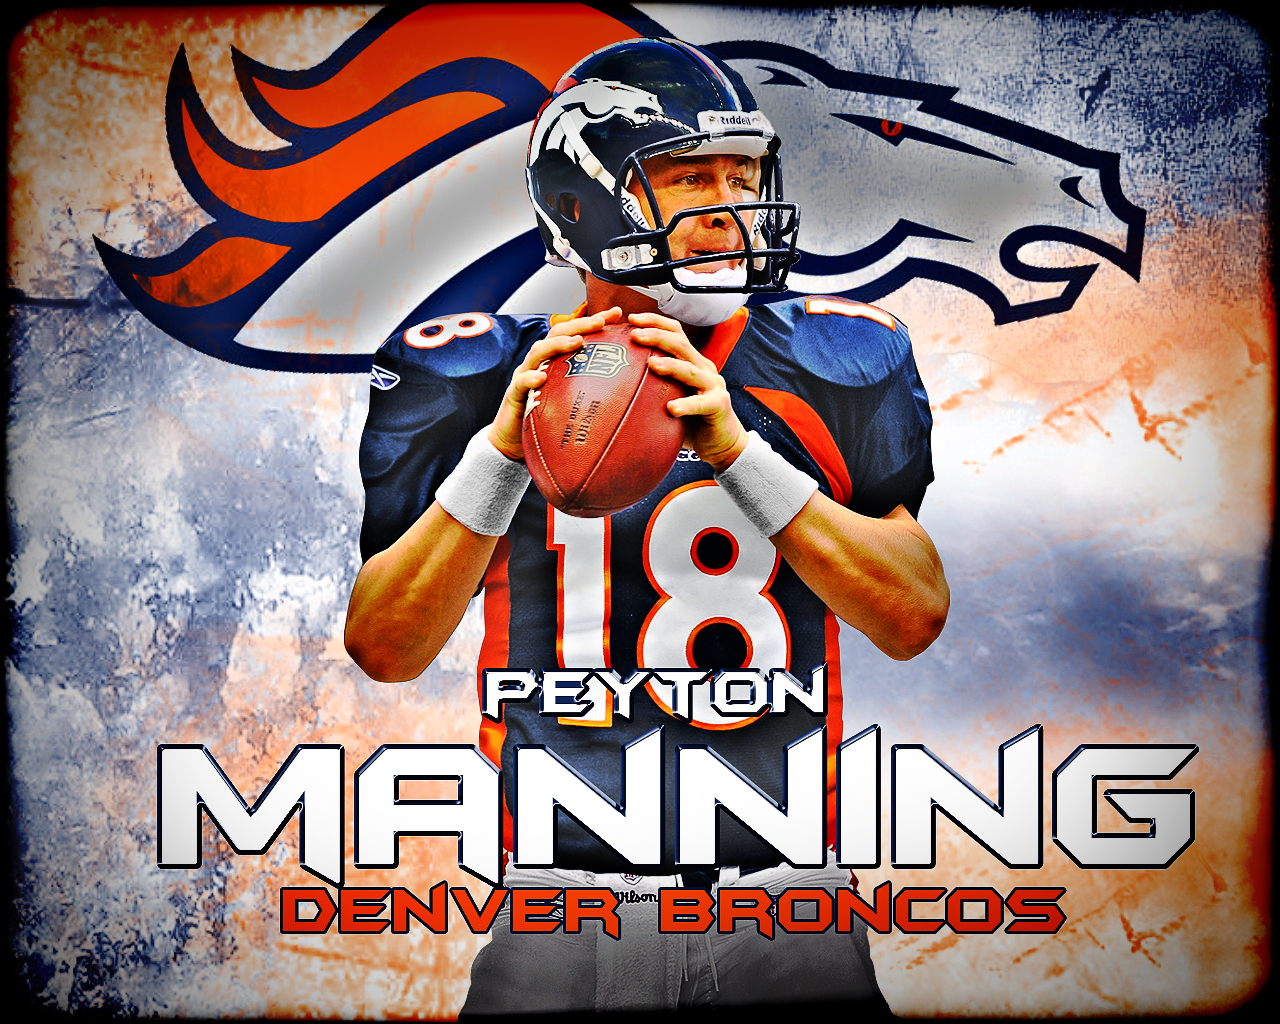    Denver Broncos   Photo Picture Image and Wallpaper Download